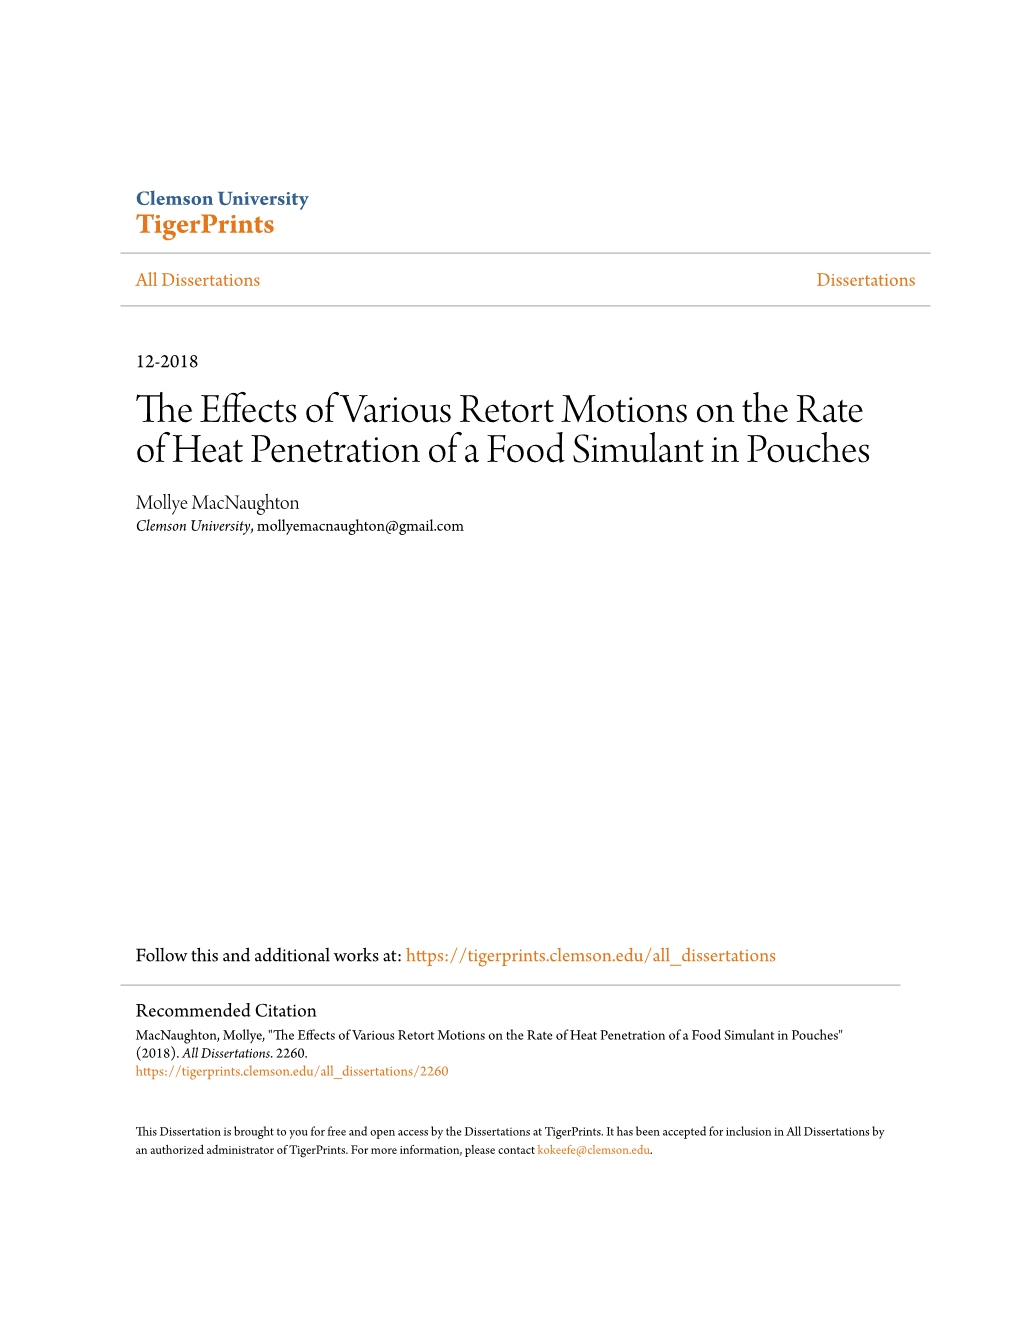 The Effects of Various Retort Motions on the Rate of Heat Penetration of a Food Simulant in Pouches" (2018)